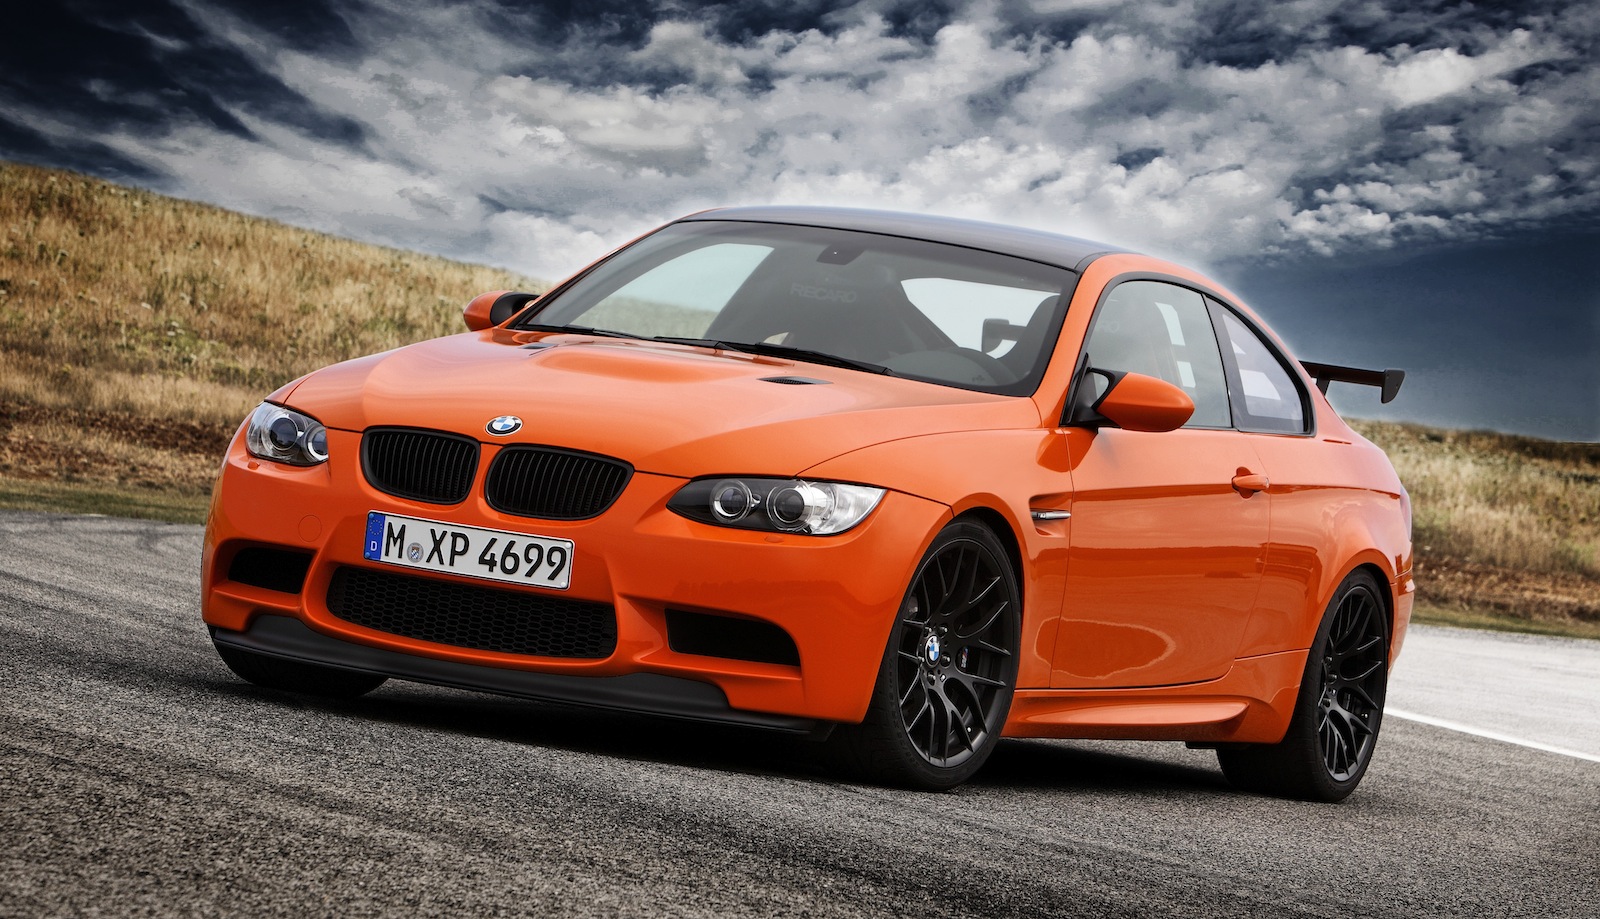 BMW M3 coupe production ends - Photos (1 of 8)